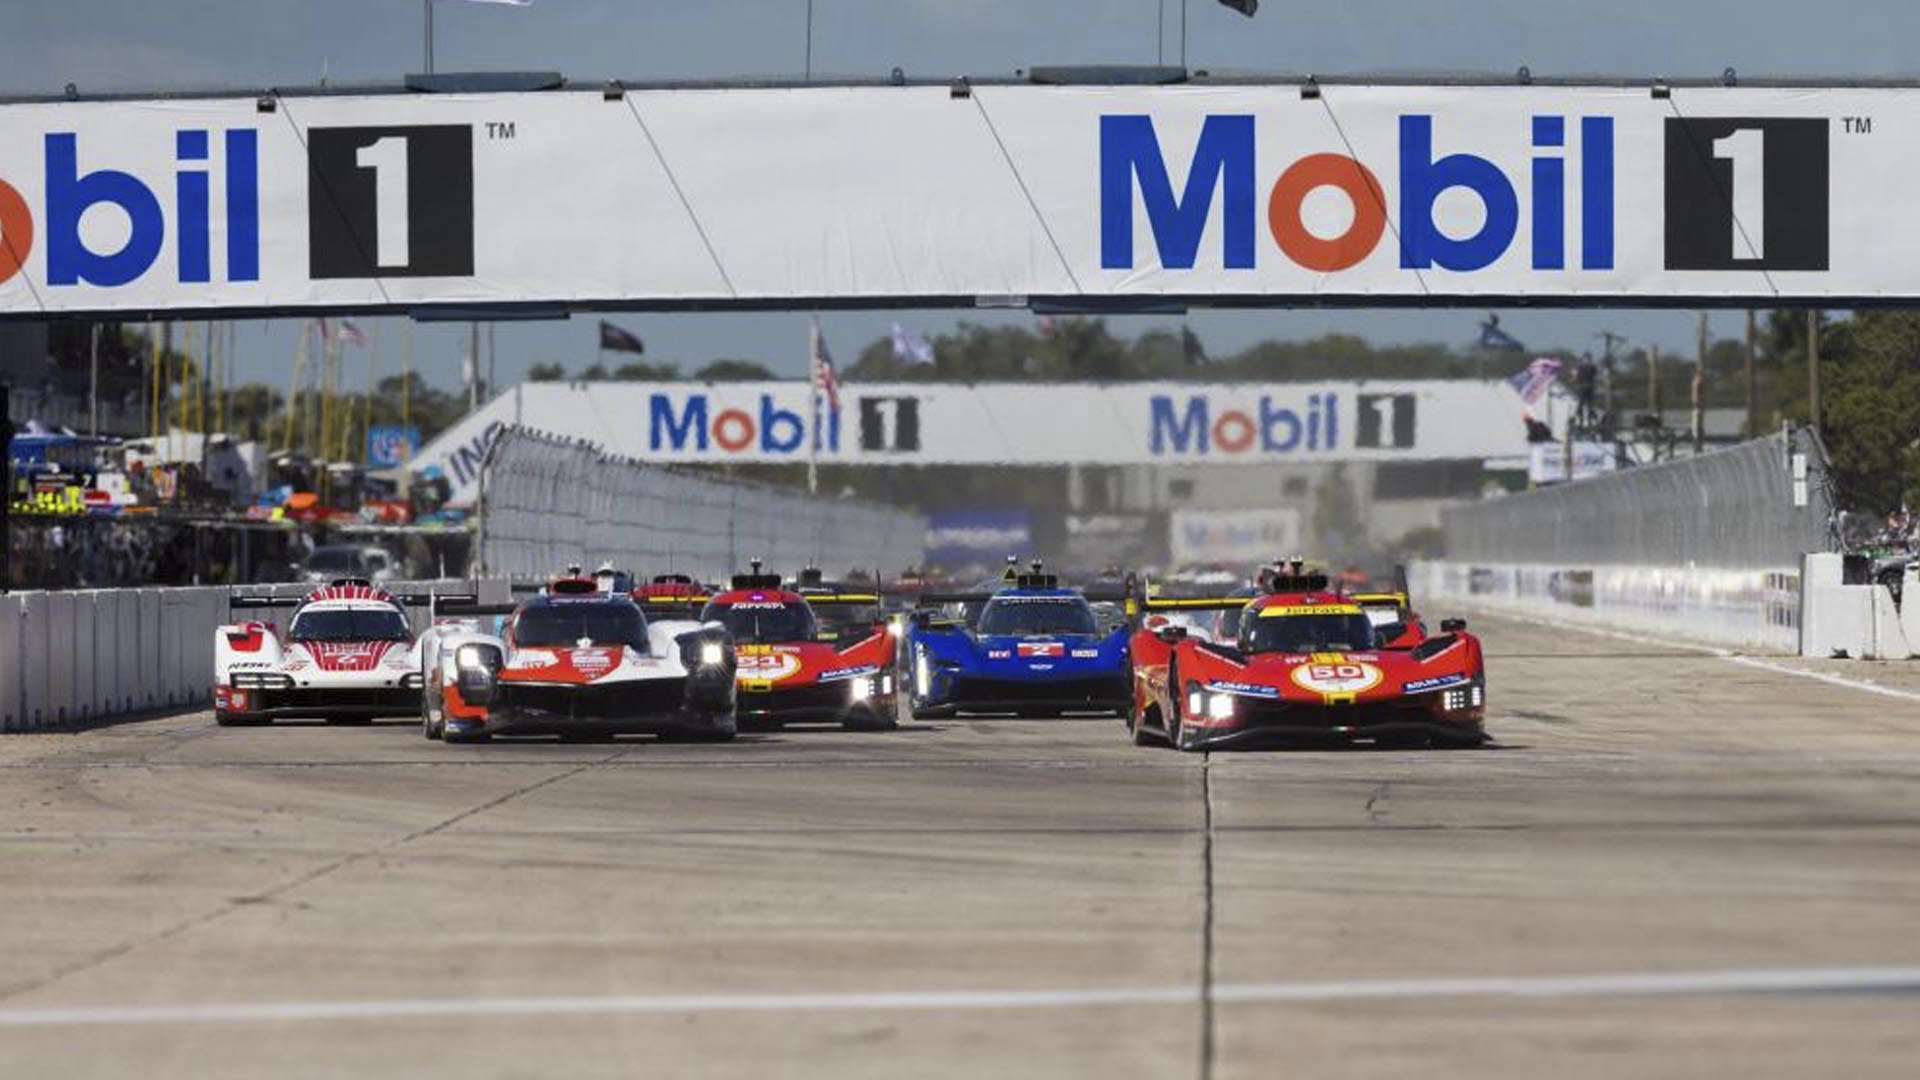 FIA WEC - The Hype is coming to Sebring. 🇺🇸 The 2023 FIA World